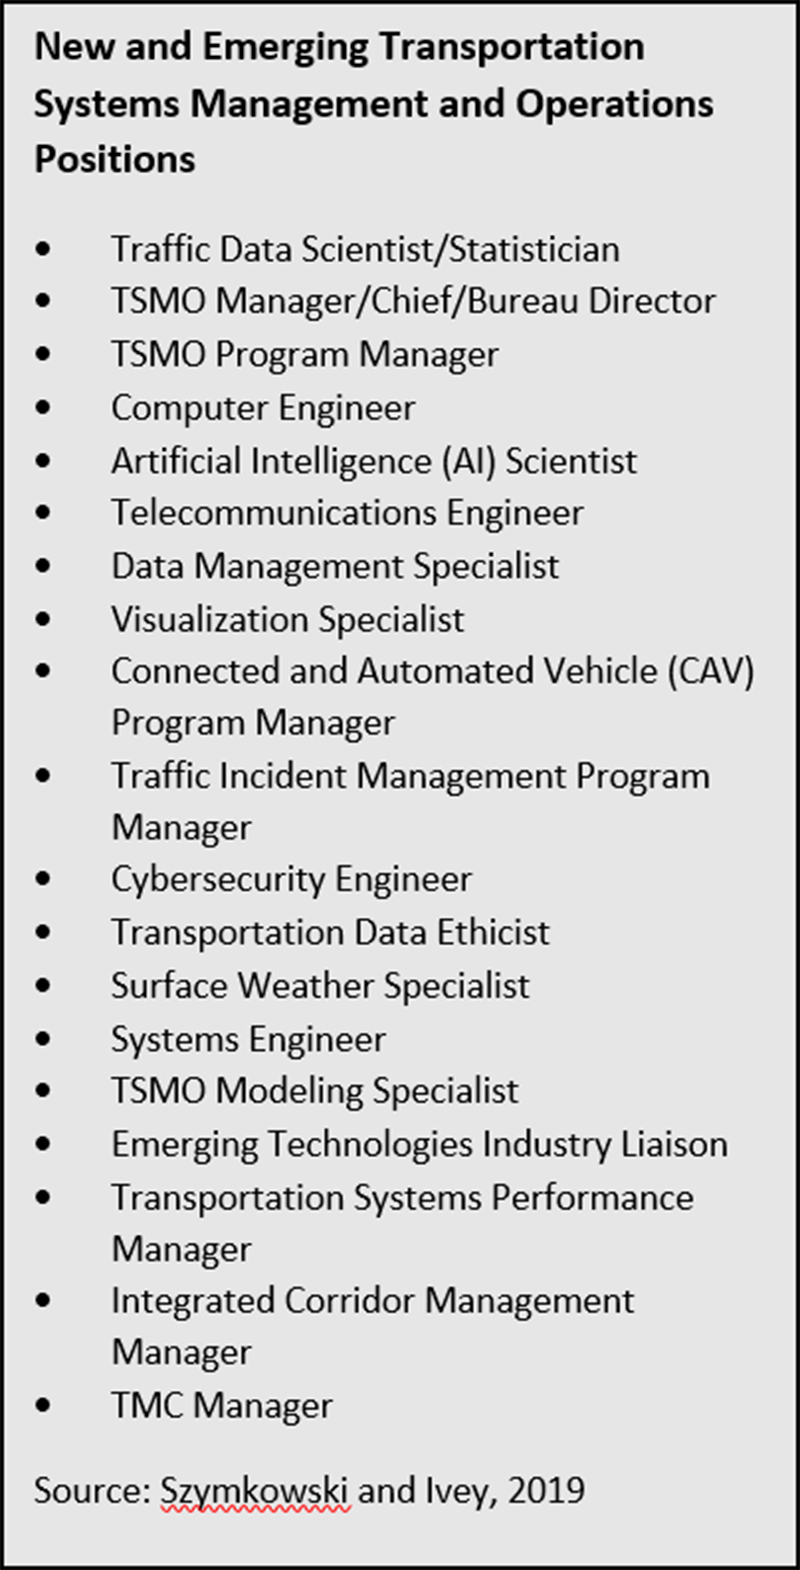 New and Emerging Transportation Systems Management and Operations Positions